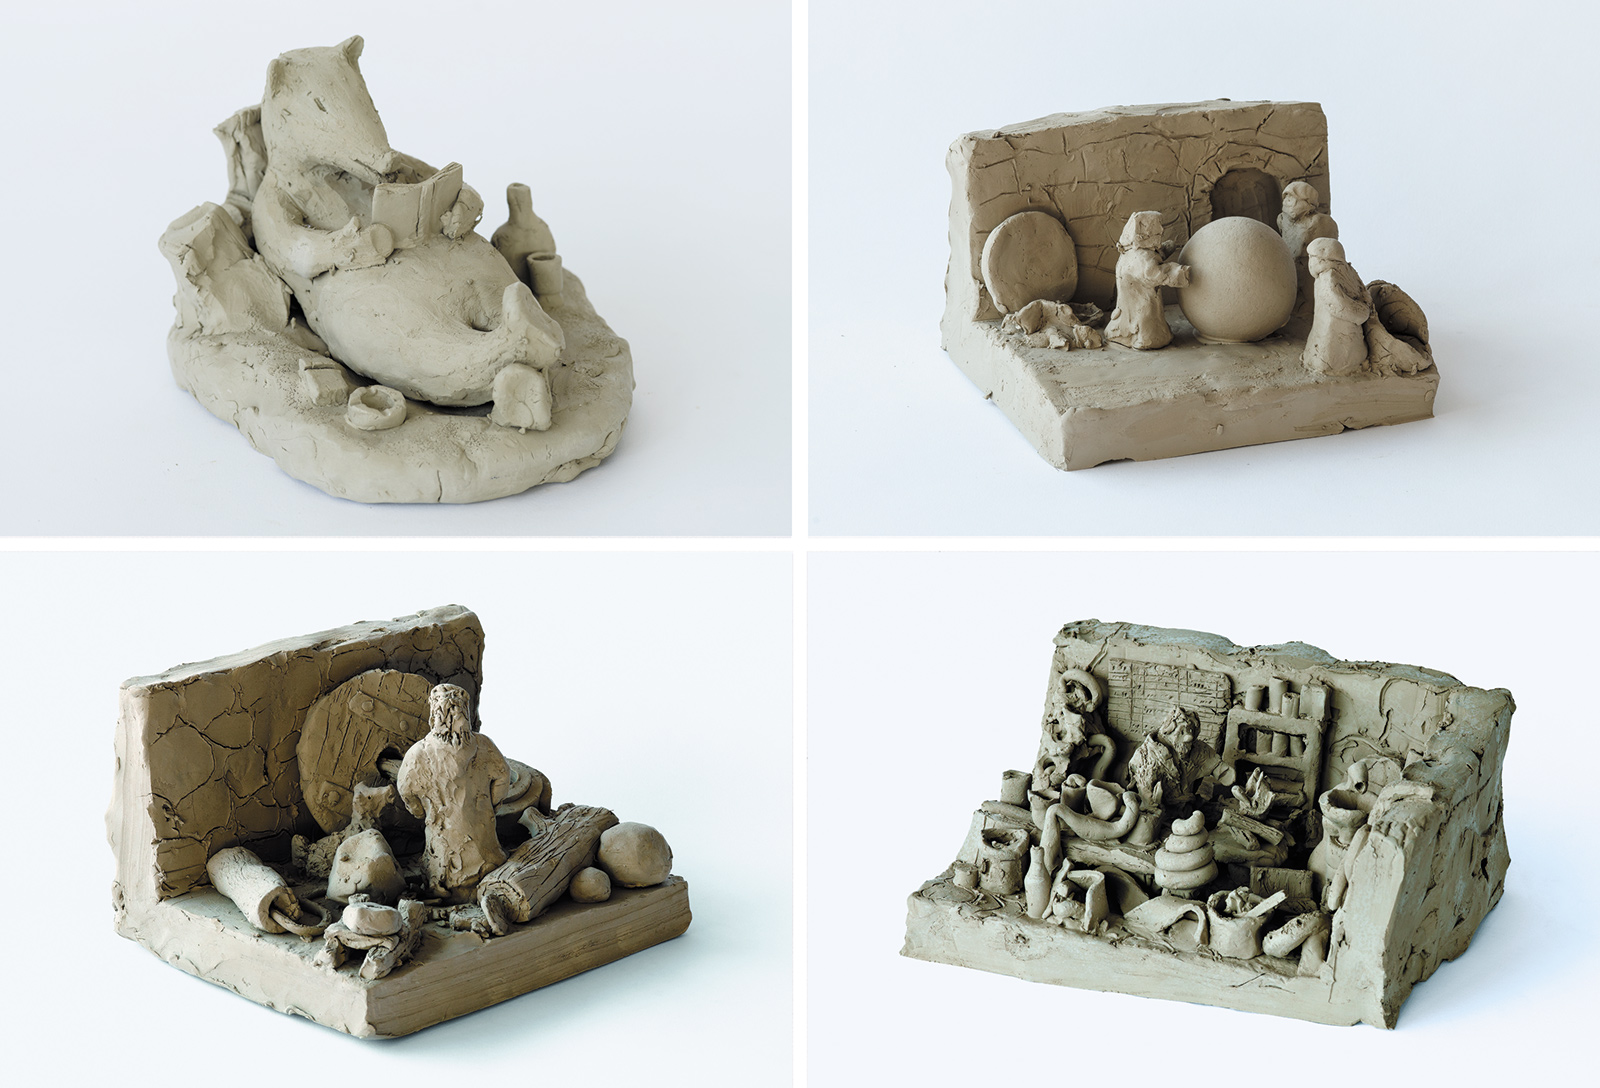 Small clay sculptures from Peter Fischli and David Weiss’s series Suddenly This Overview (1981–present), which depict, according to Sanford Schwartz, ‘historical events, moments that might have been, and visualizations of age-old sayings and concepts we believe we ought to know,’ as well as ‘everyday scenes and objects.’ Clockwise from top left: Book and Reader, Galileo Galilei Shows Two Monks That the World Is Round, The Alchemist I, and The Dog of the Inventor of the Wheel Feels the Satisfaction of His Master.